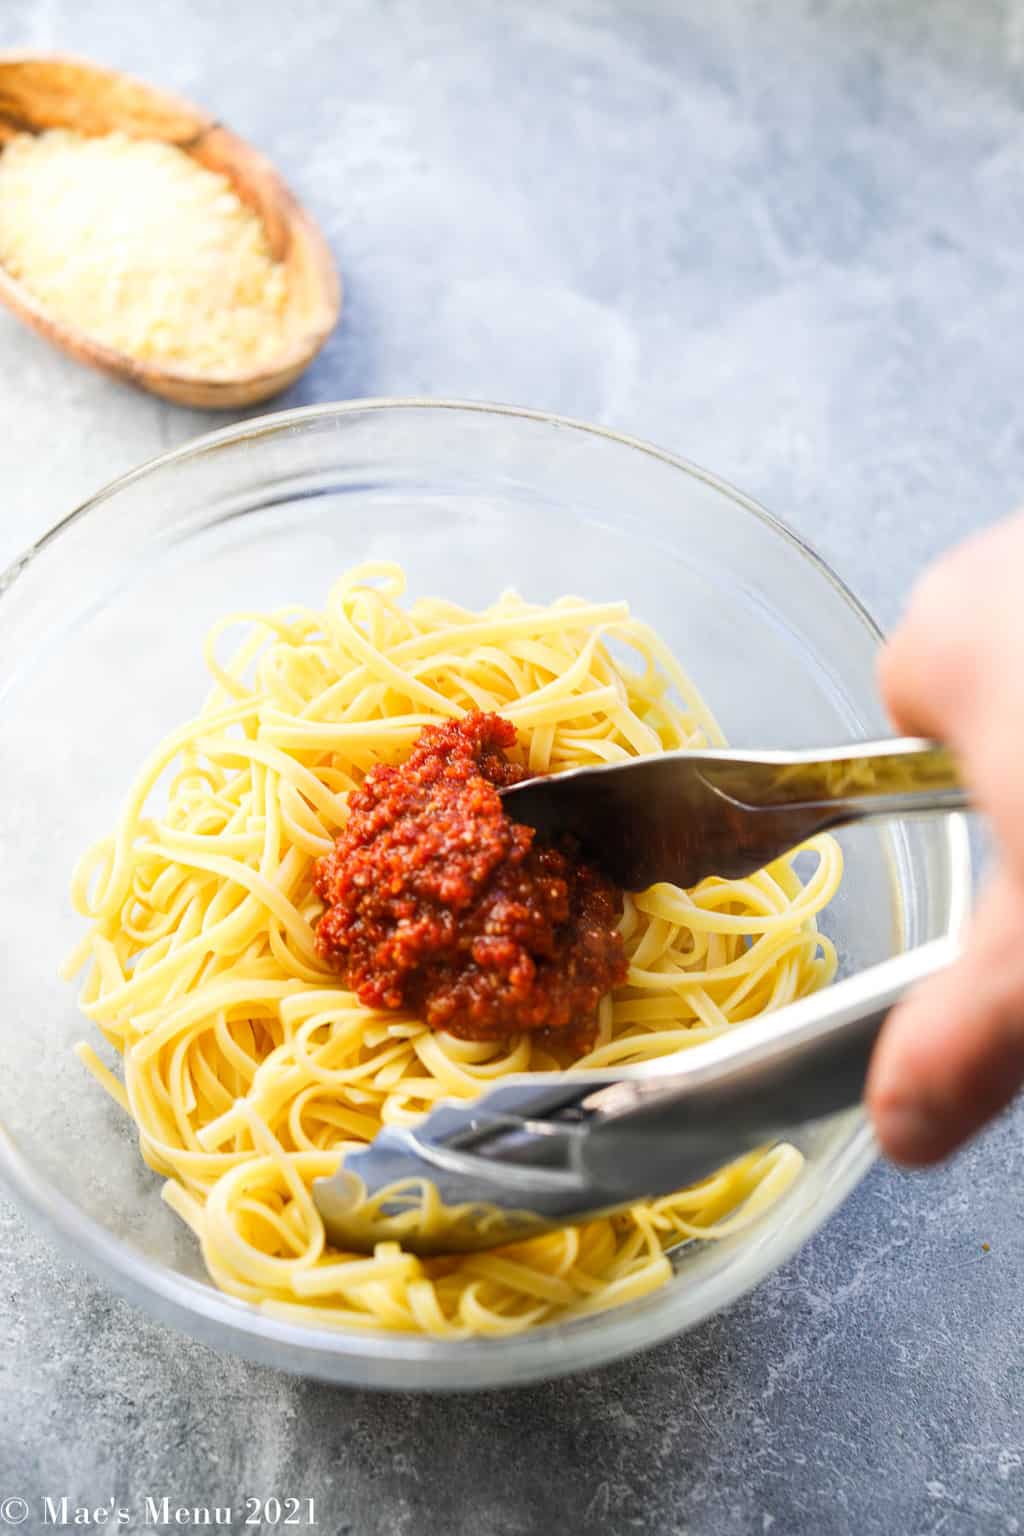 Tossing pasta with the tomato pesto in a glass mixing bowl